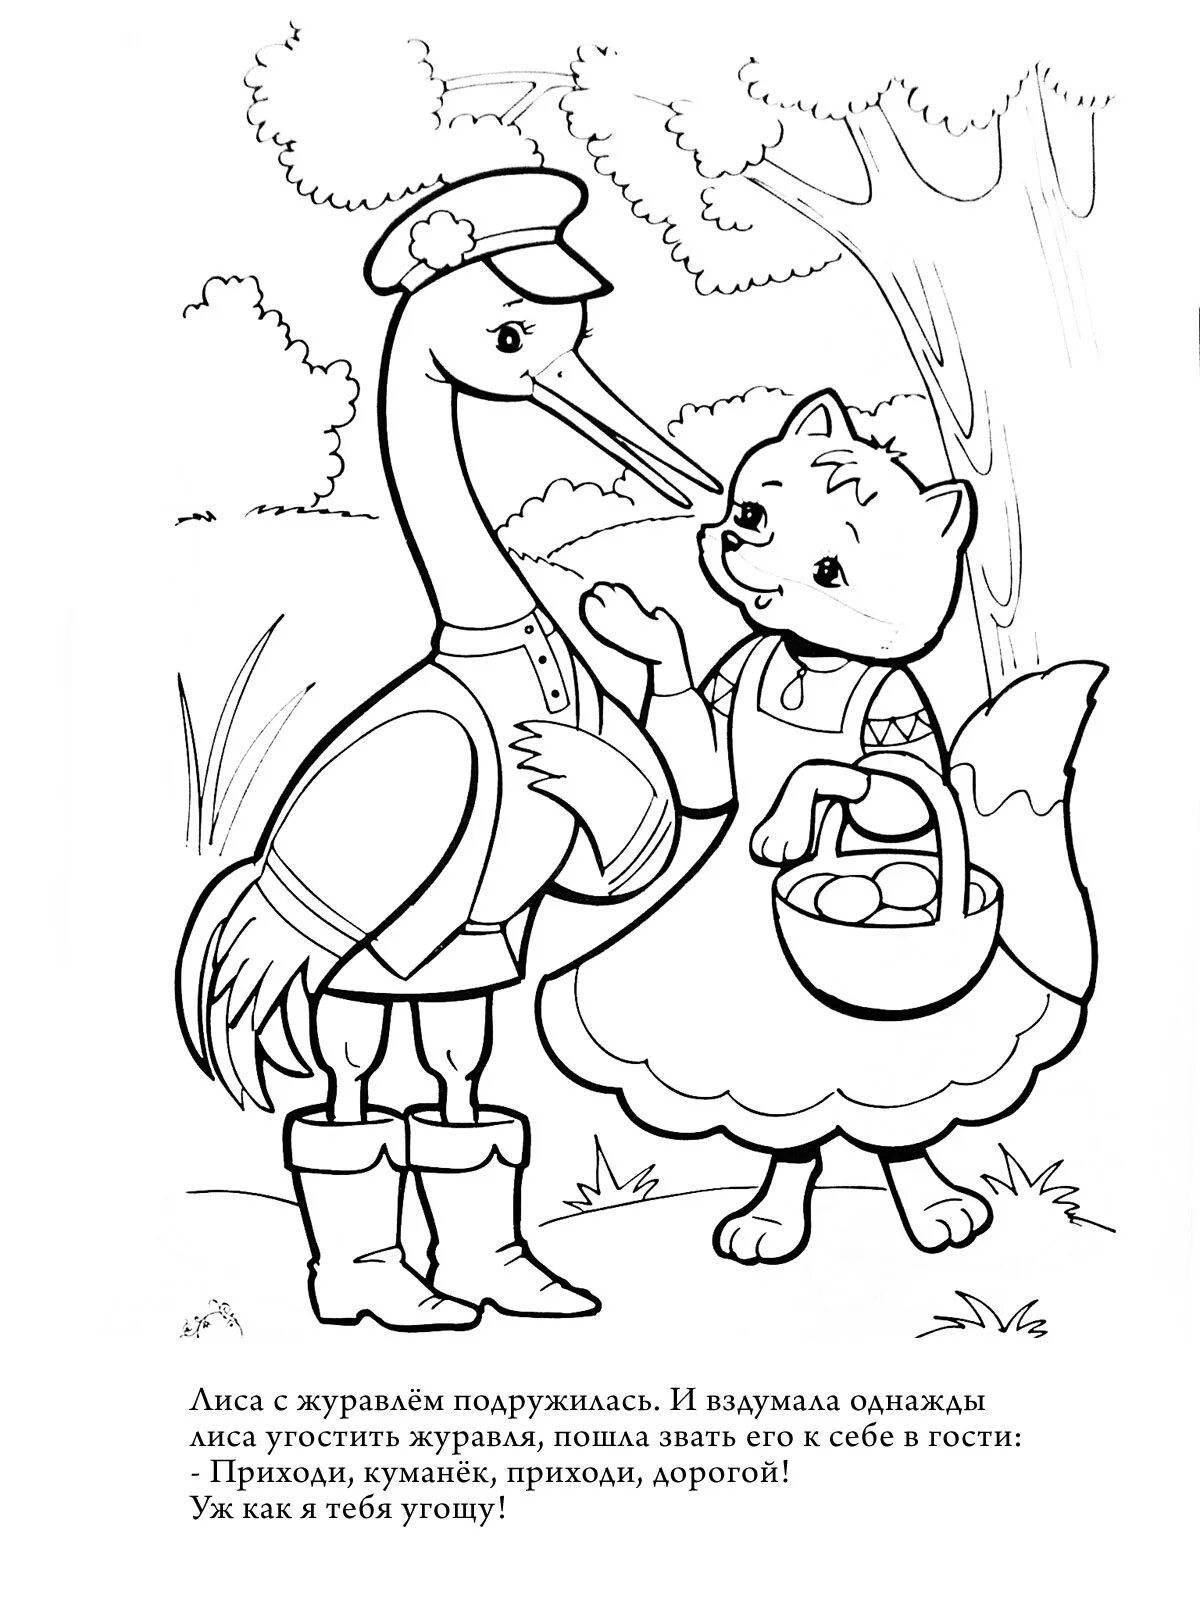 Exciting coloring book crane and fox fairy tale